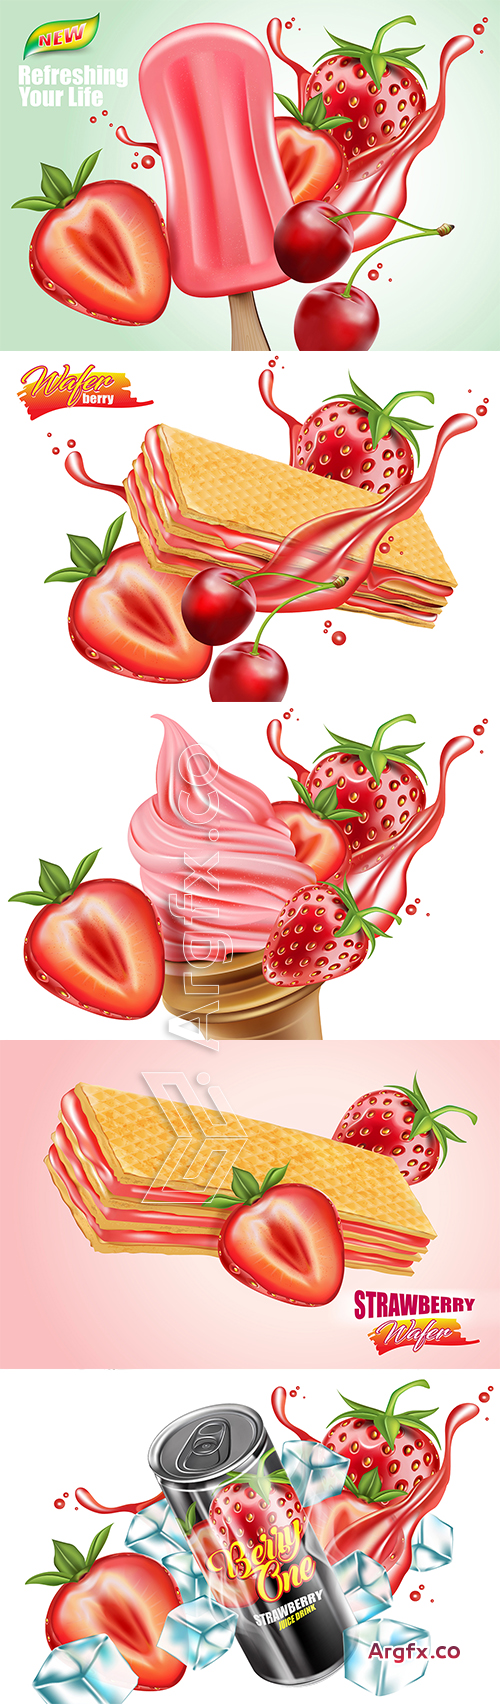 Food concept advertising, realistic vector 3D illustration